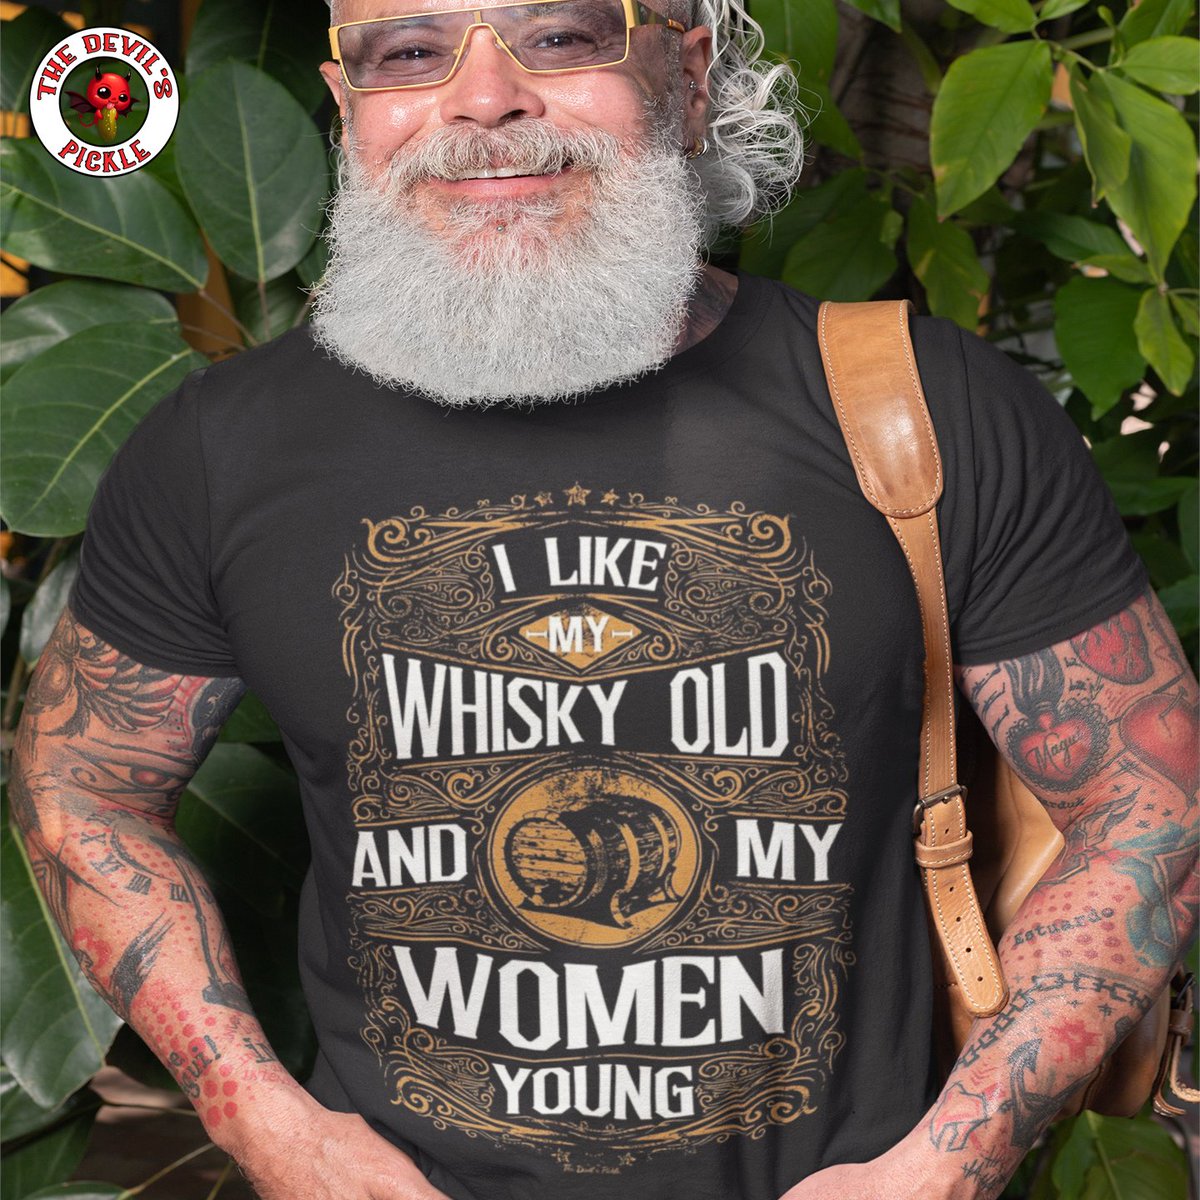 Age is just a number, but good whiskey and young women? Now that's a winning combination. The Best Beer & Booze Drinking Tees around!

#byob #adulthumor #BottomsUp #beertshirts #beerdrinking #daydrinking #ThirstyThursday #whiskeyoclock #SipSipHooray #beeroclock #beerandbooze